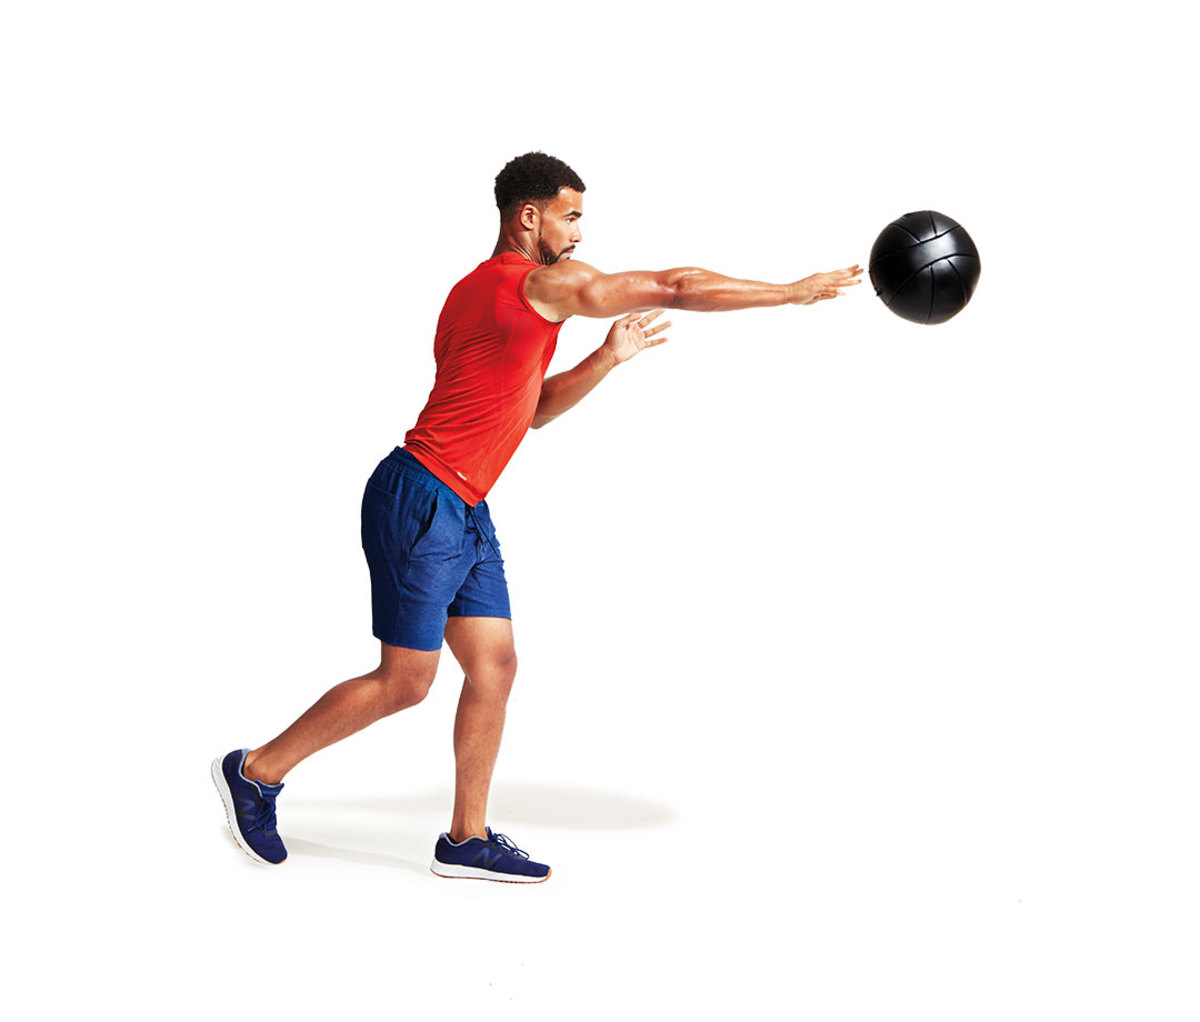 Medicine ball woodchop. Medicine ball wood chop, finish position. exercise,  fitness picture. | CanStock